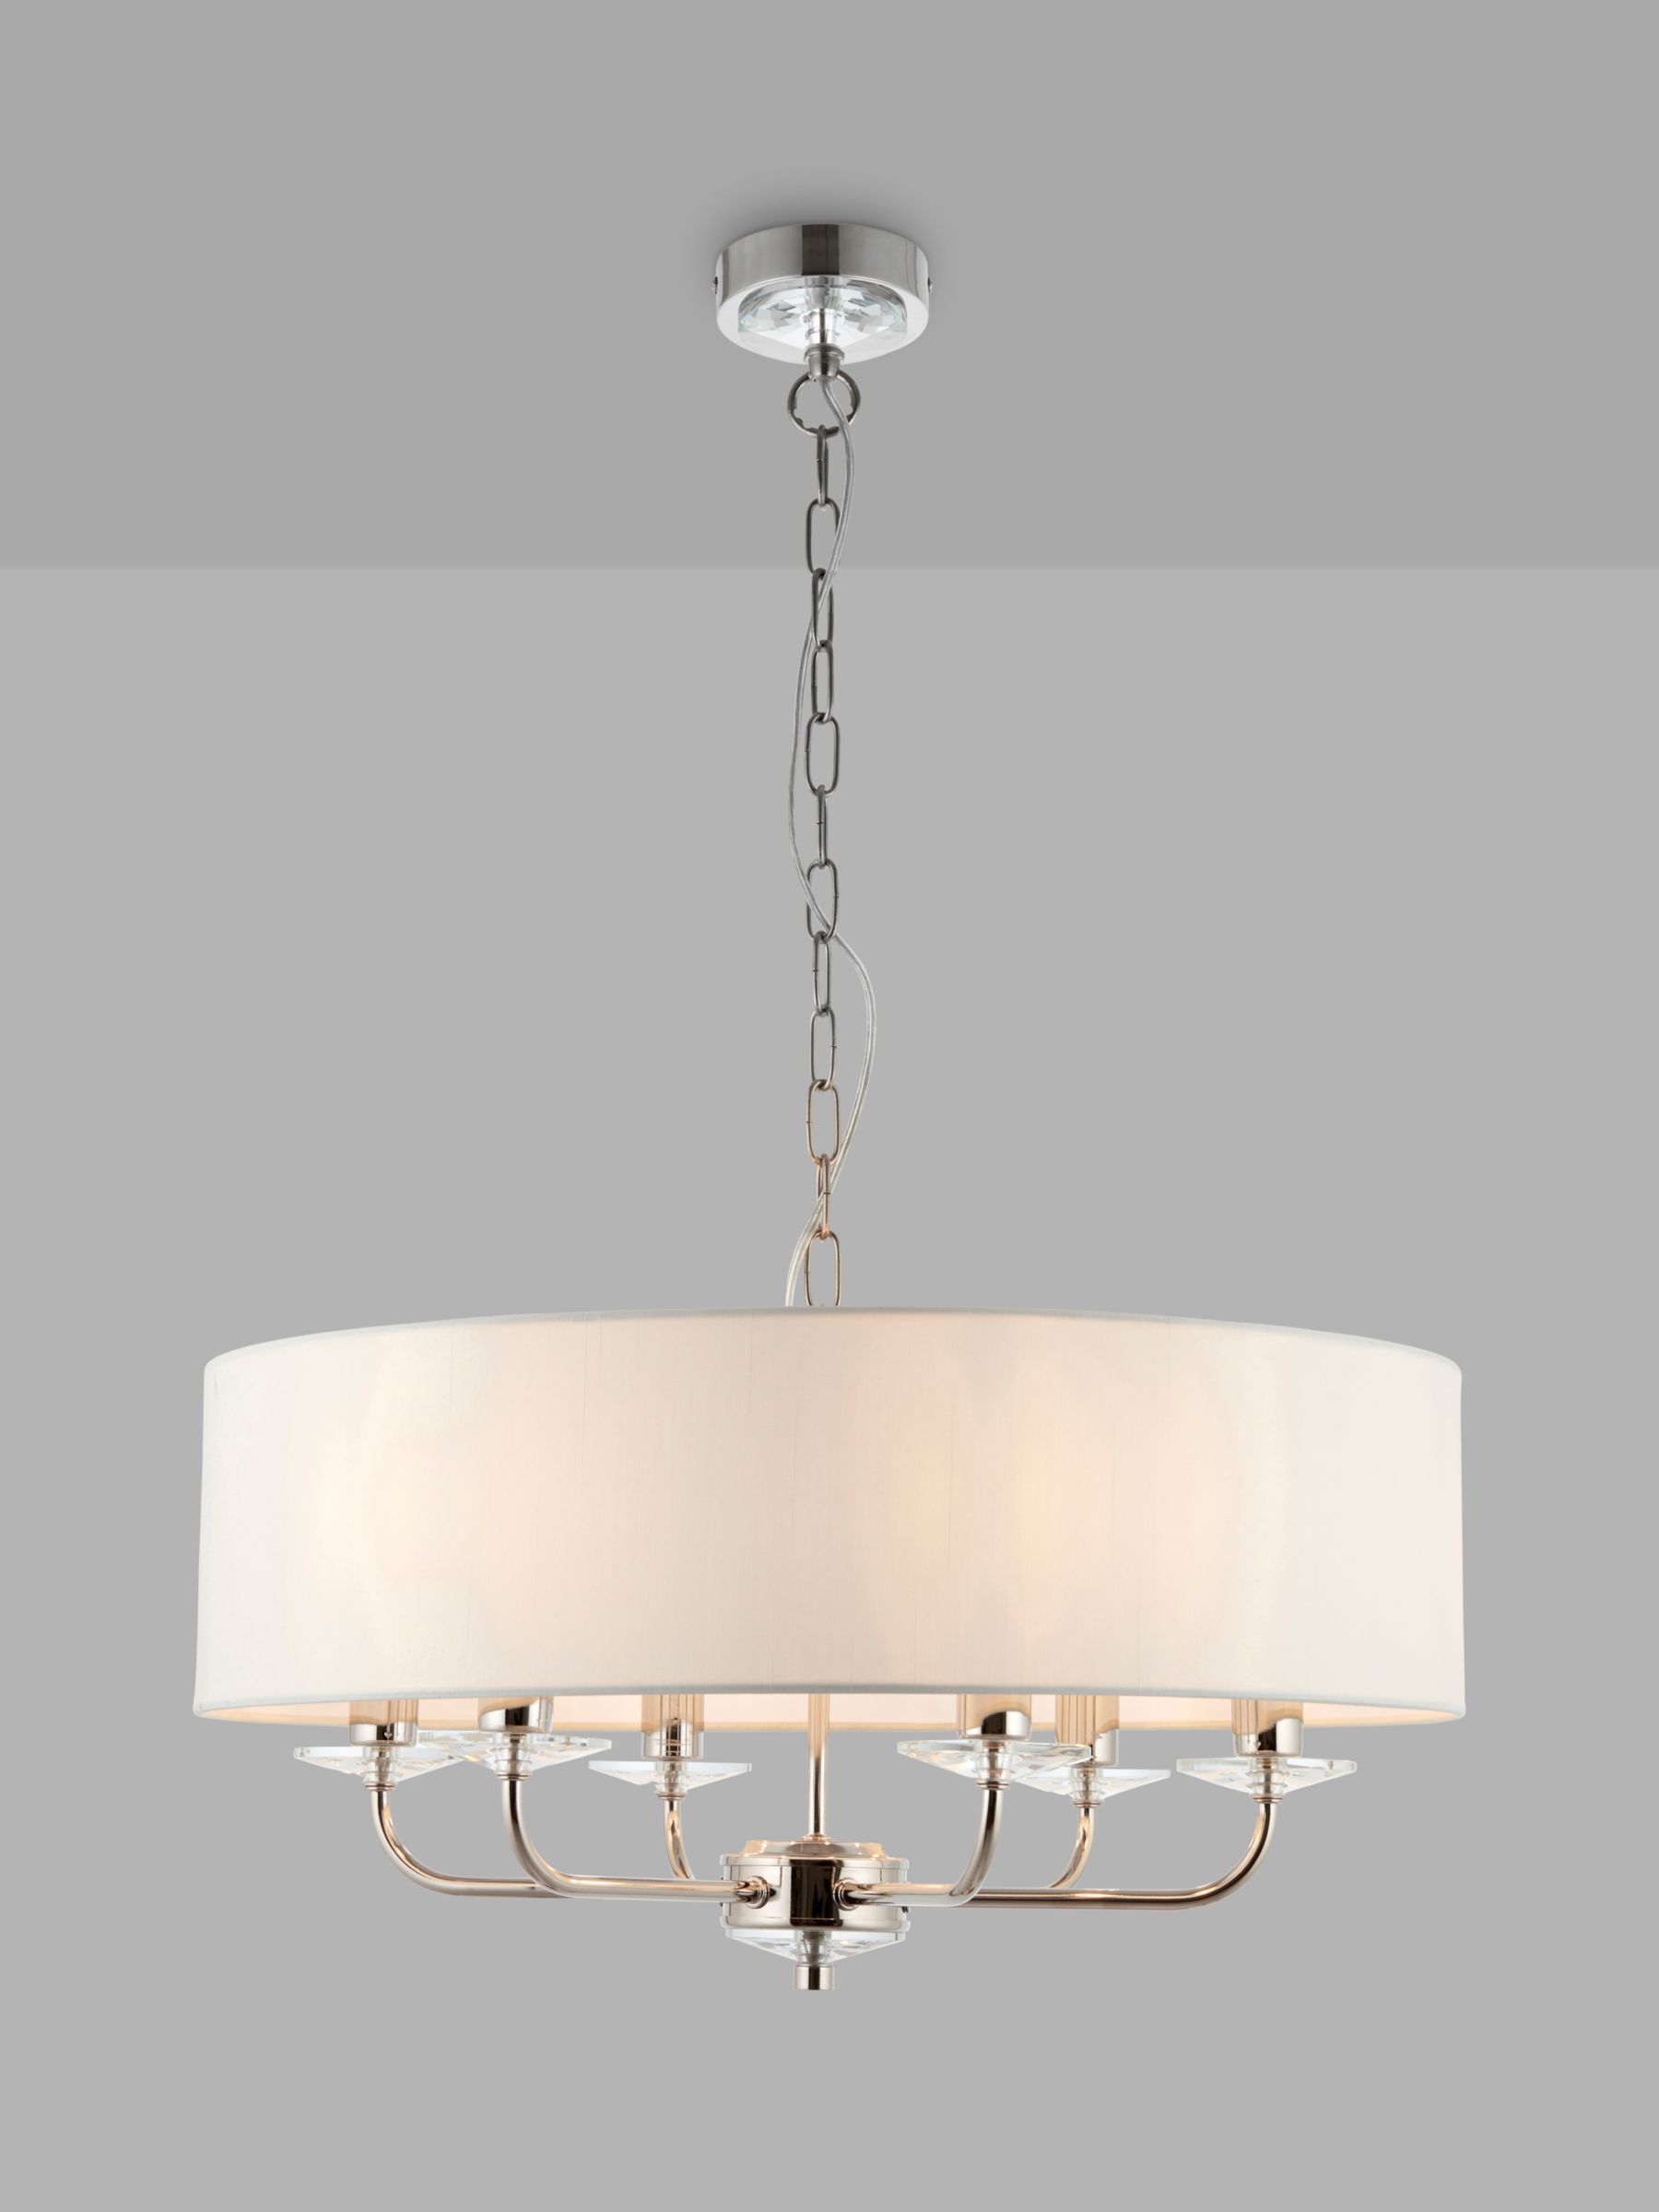 Photo of Bay lighting hailey 6 arm ceiling light silver